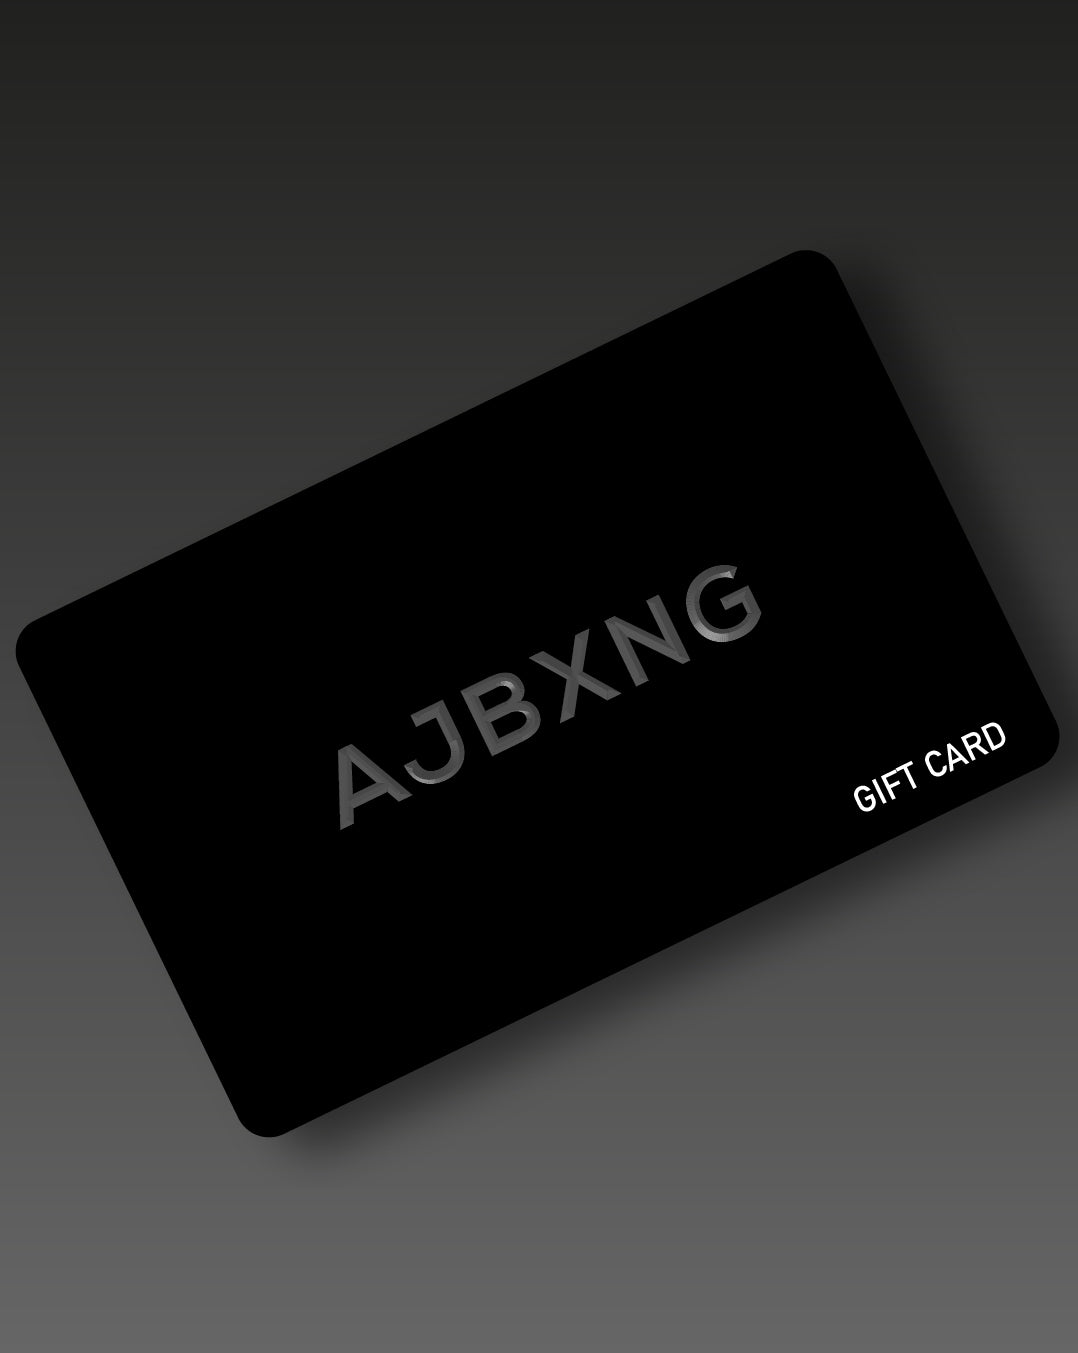 AJBXNG gift card